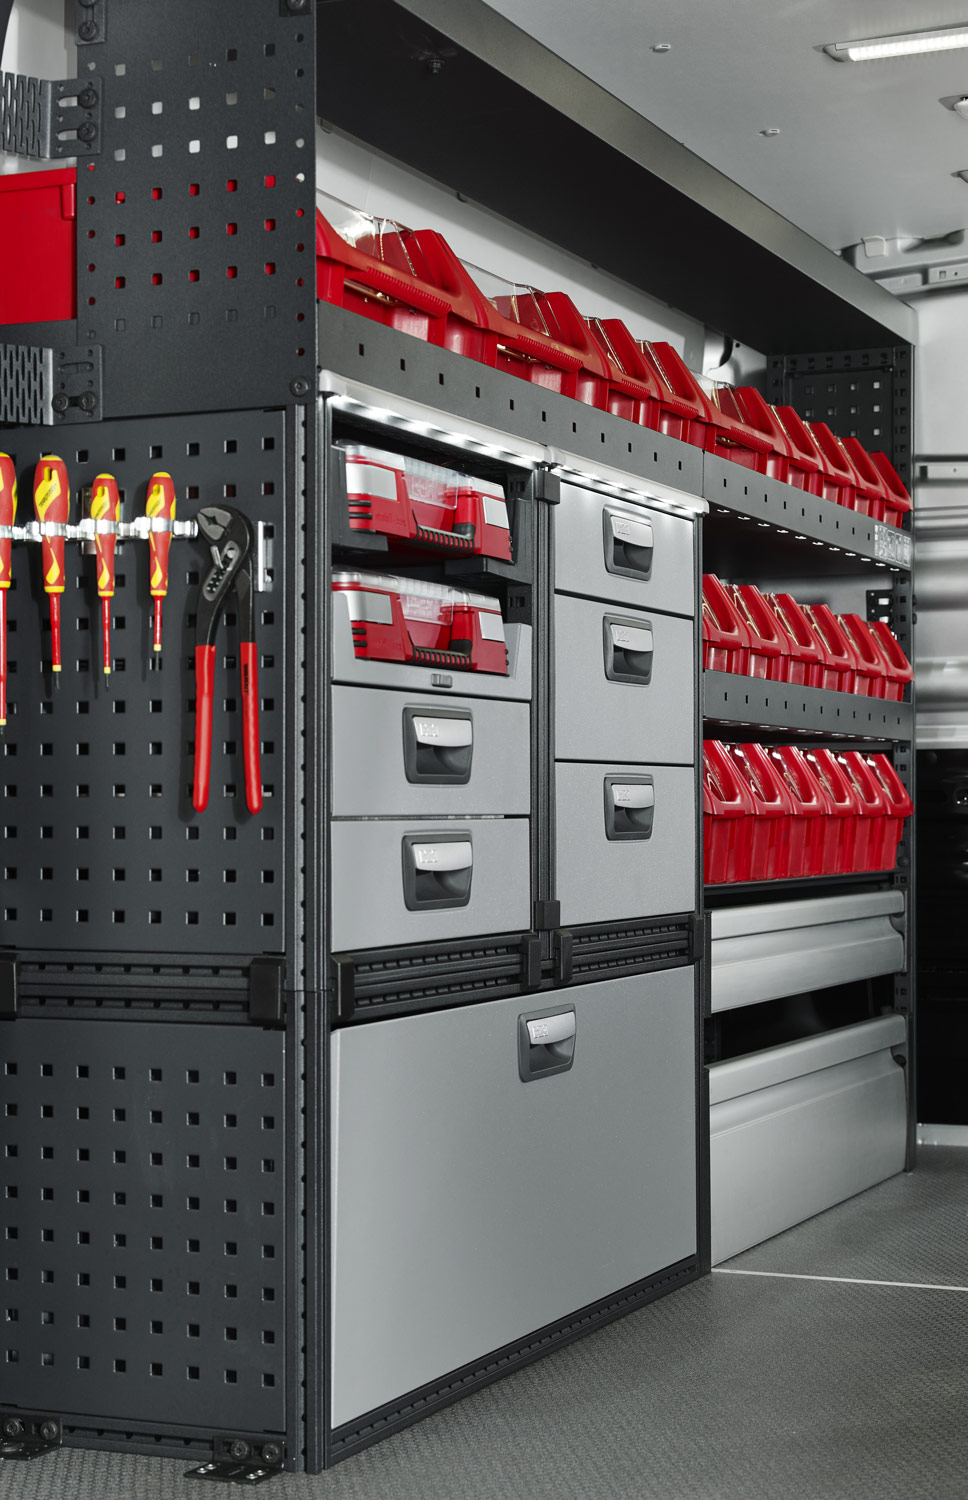 Example of modul-system van racking with drawers, storage boxes and shelving